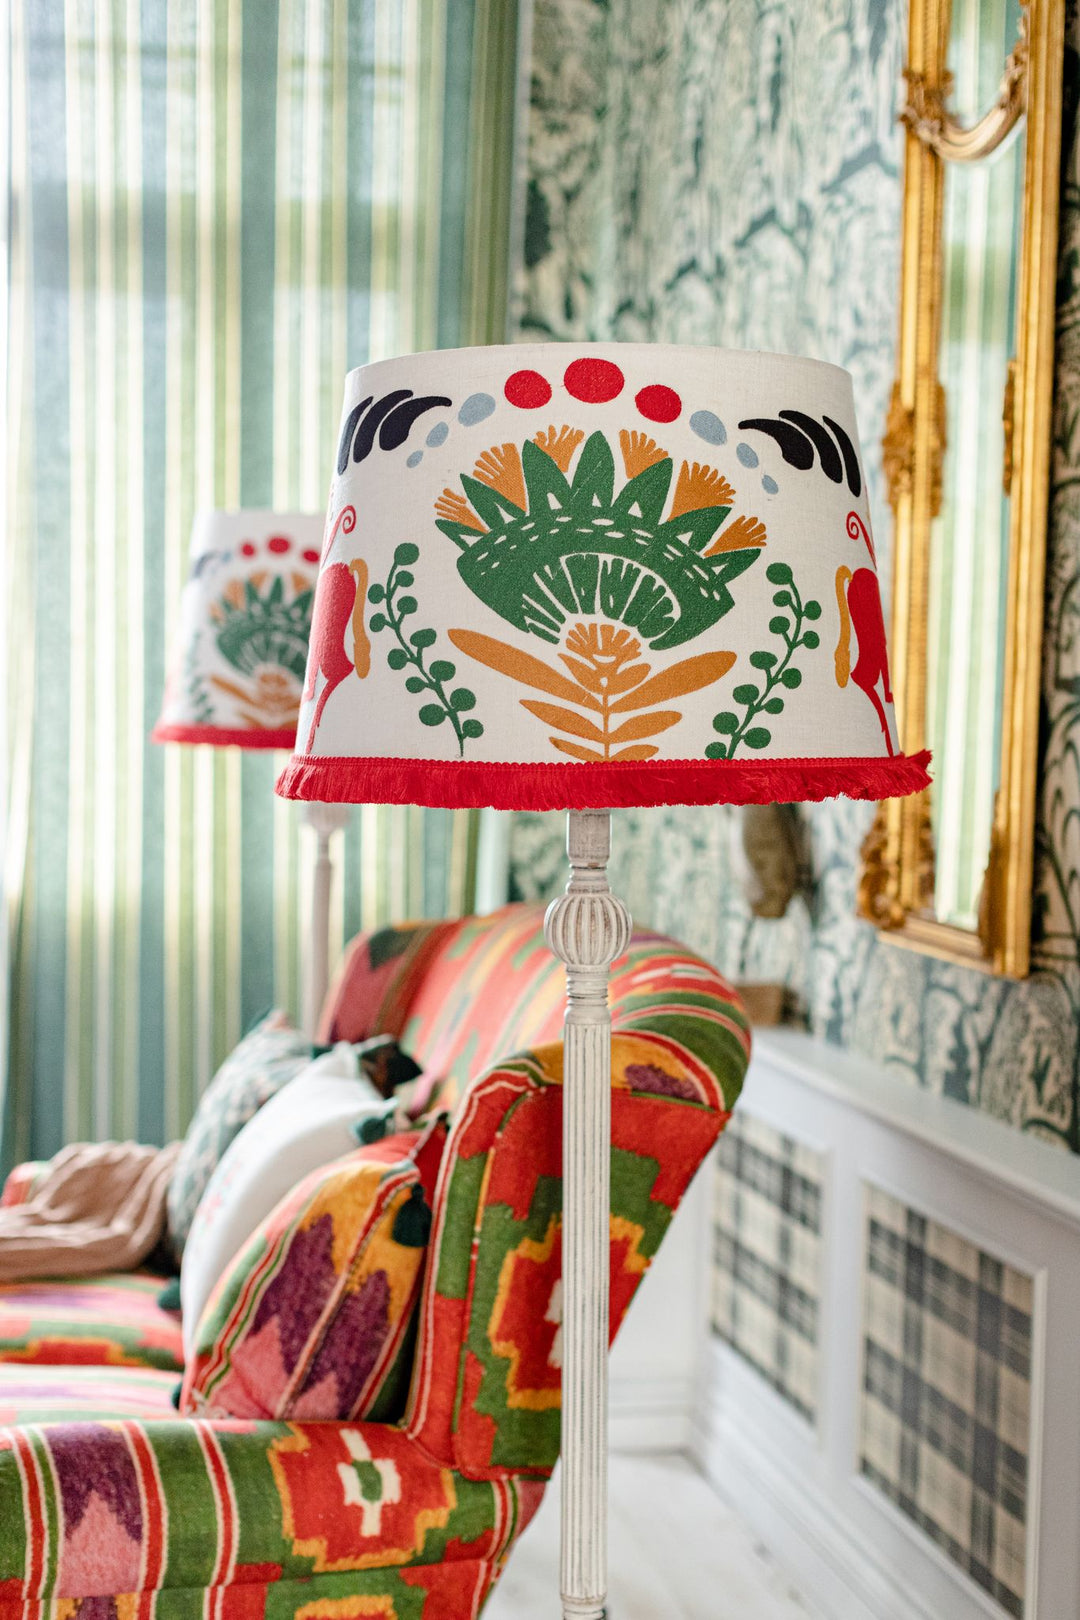 embroidered cone lampshade horse and flowers folk design red white and green with fringe floor lamp sofa room set